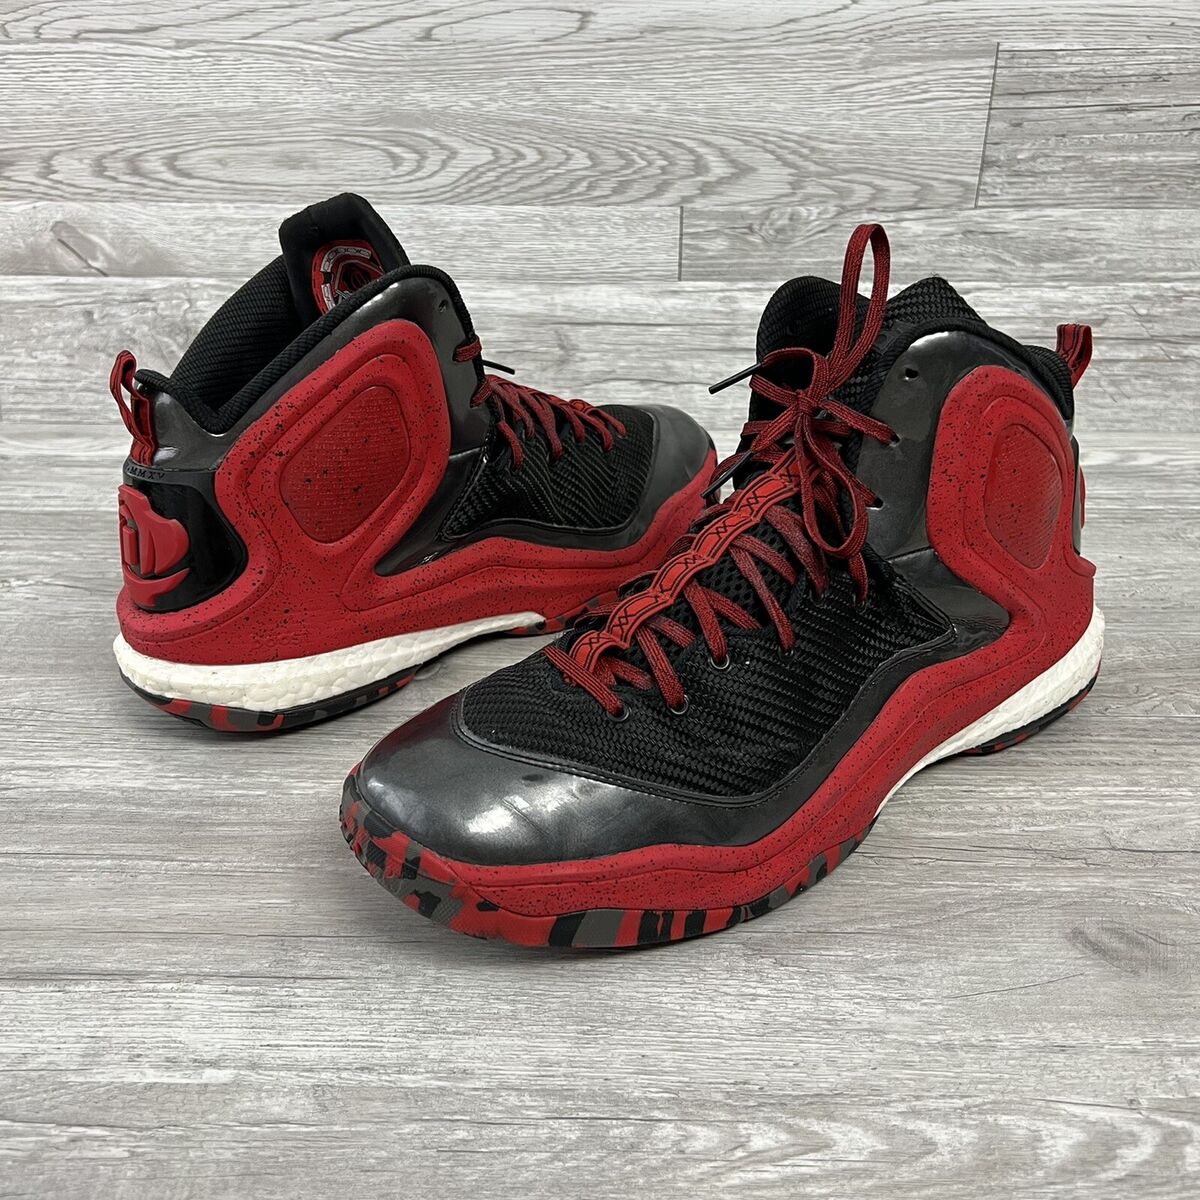 Adidas D Rose Red Dragon Shoes Derrick Rose Grey/ Red 16 |